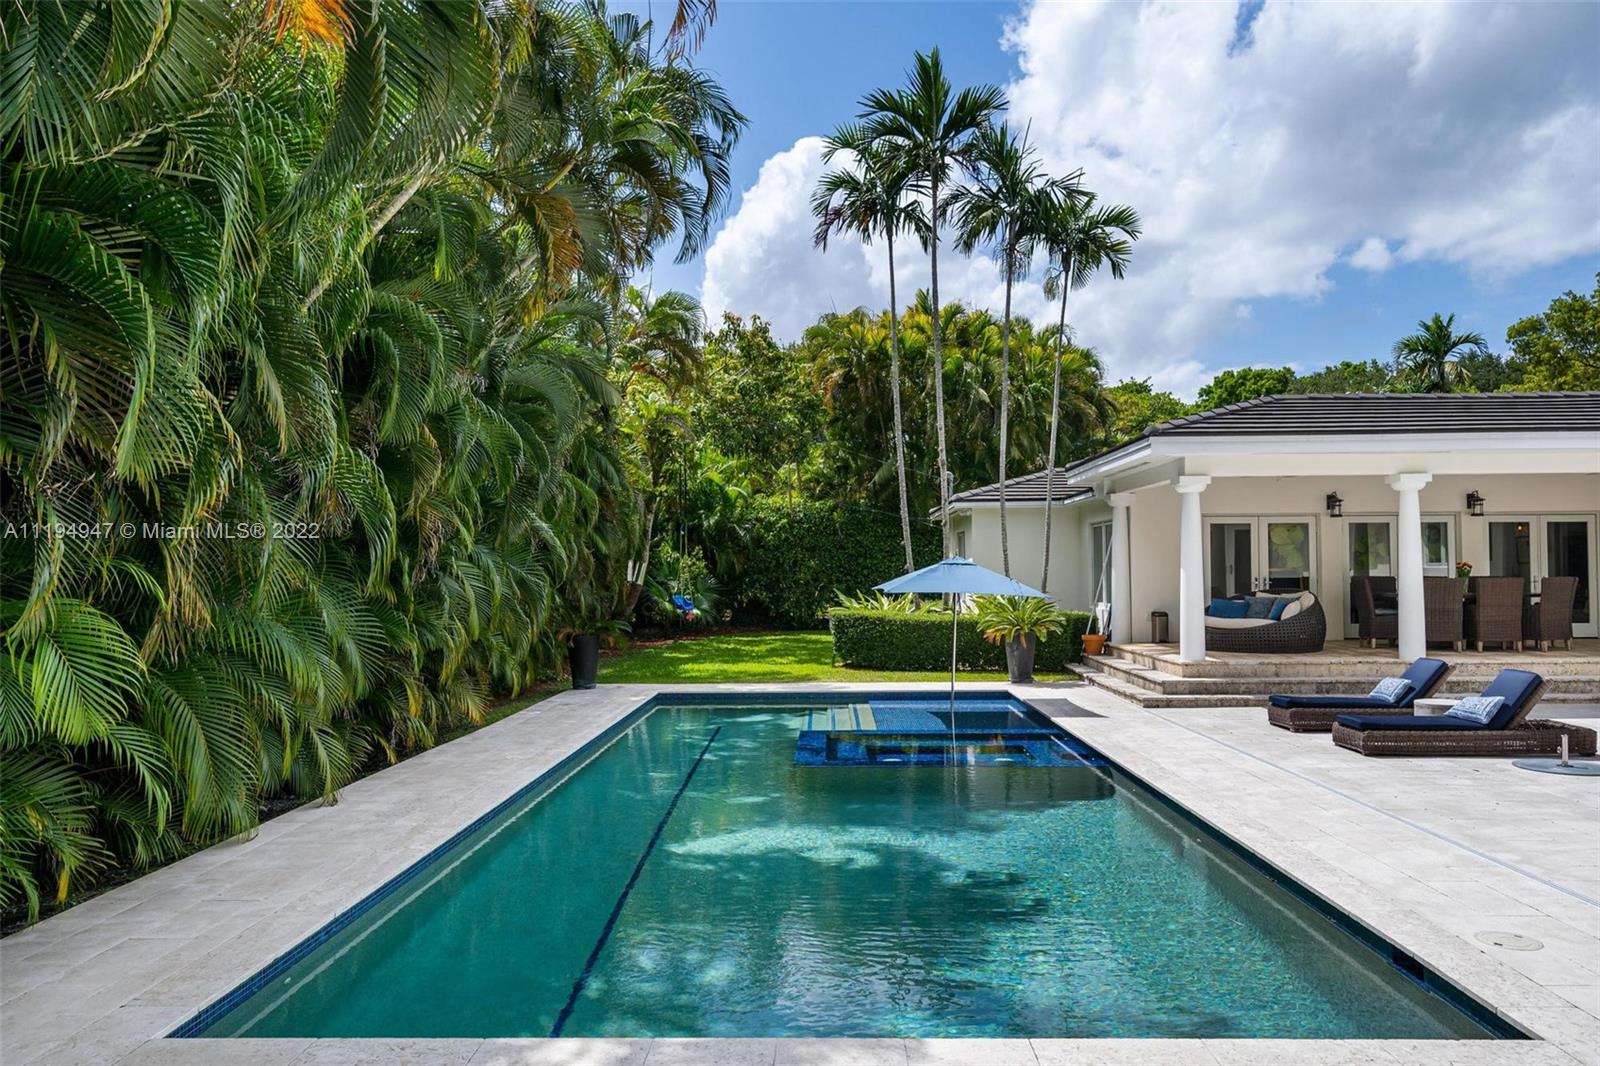 Located in the exclusive neighborhood of Coral Gables, this charming home is within walking distance of The Biltmore Hotel, Riviera Country Club, and Miracle Mile. The lushly landscaped home features 4 beds/3 baths, family room, Florida room, formal living & dining, and a newly renovated kitchen with Subzero refrigerator, gas stove, and breakfast nook. Sitting on an oversized lot (15,333 SF), this spectacular home offers an ample backyard with a heated saltwater pool & jacuzzi, summer kitchen with covered outdoor dining, lounge area, plus room for a playground or mini golf, perfect for entertaining family and friends. Minutes away from some of Miami’s top-rated A+ schools, South Miami Hospital, Brickell, and is surrounded by restaurants, shops, and many more amenities. A true gem!